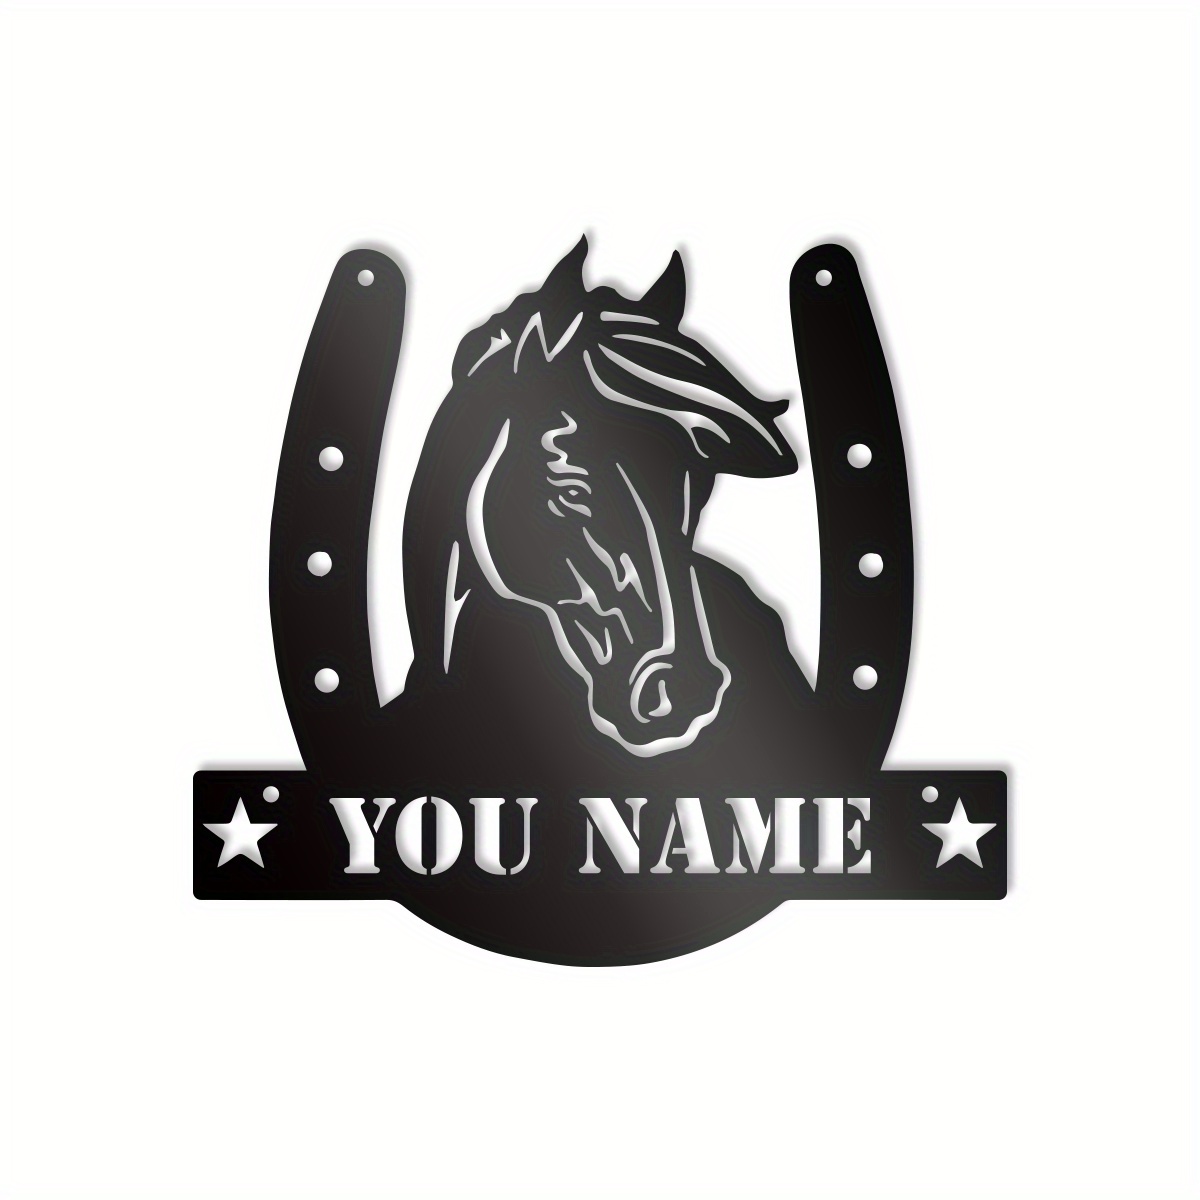 1pc customizable metal horse stall sign equestrian wall art decor personalized farm name horseshoe monogram horse address plaque artistic decor for stables and barns